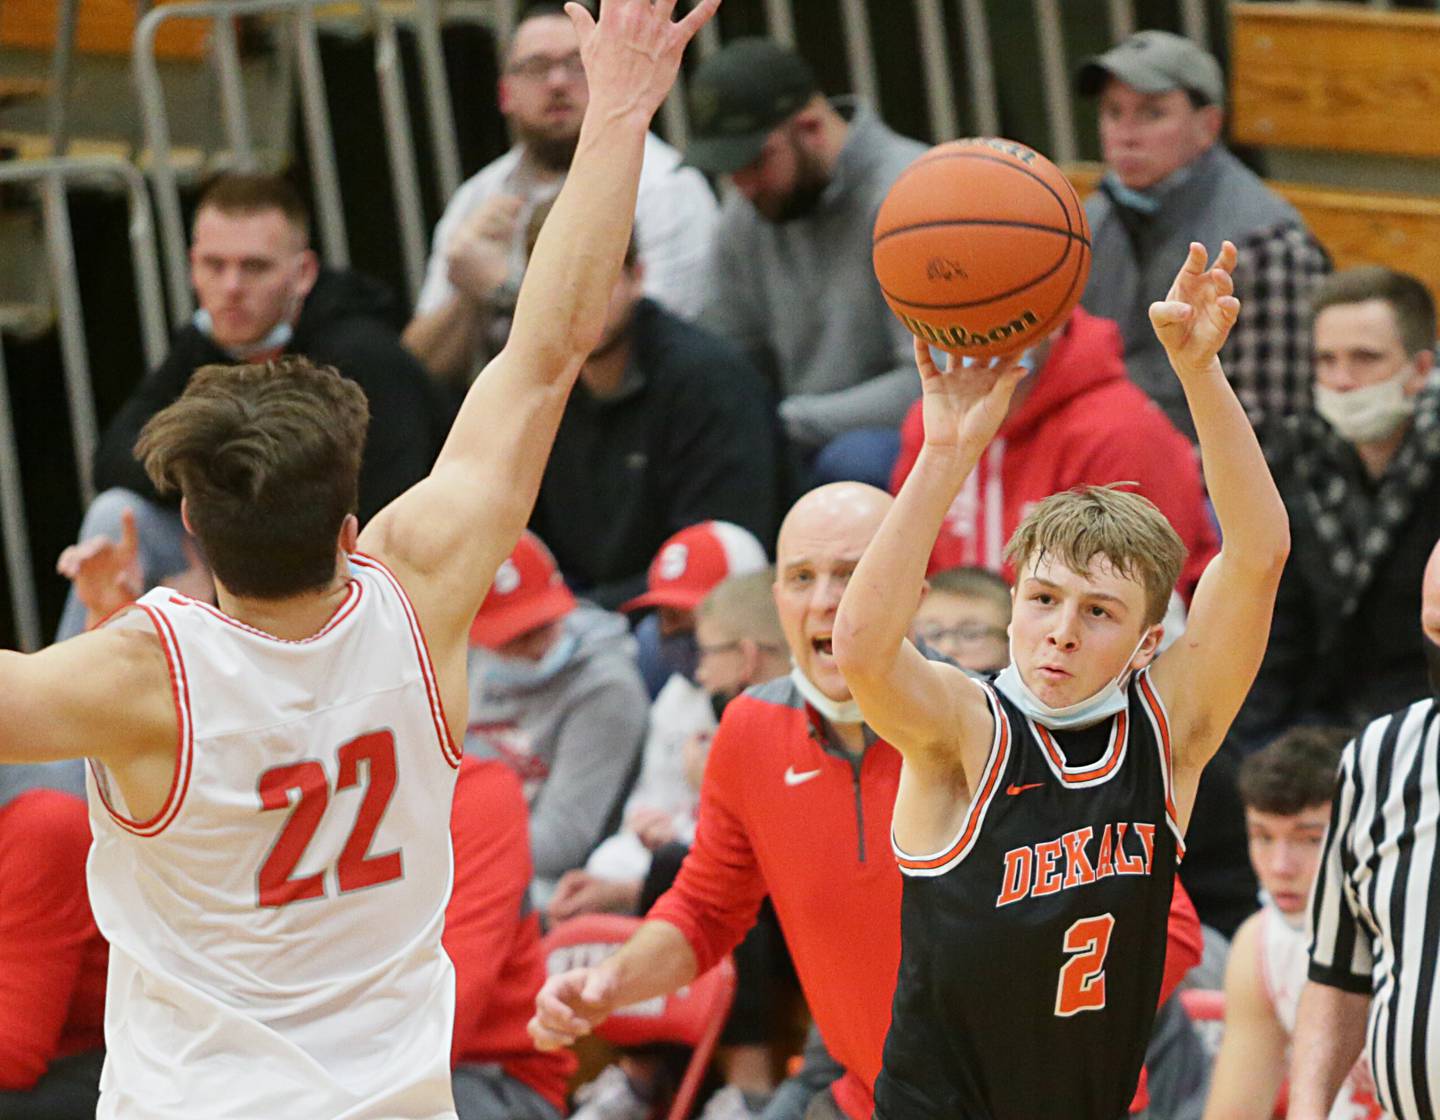 DeKalb's Sean Reynolds (2) sinks a 3-point basket over the outstretched hand of Streator's Christian Benning (22) on Saturday, Jan. 22, 2022, at Pops Dale Gymnasium.